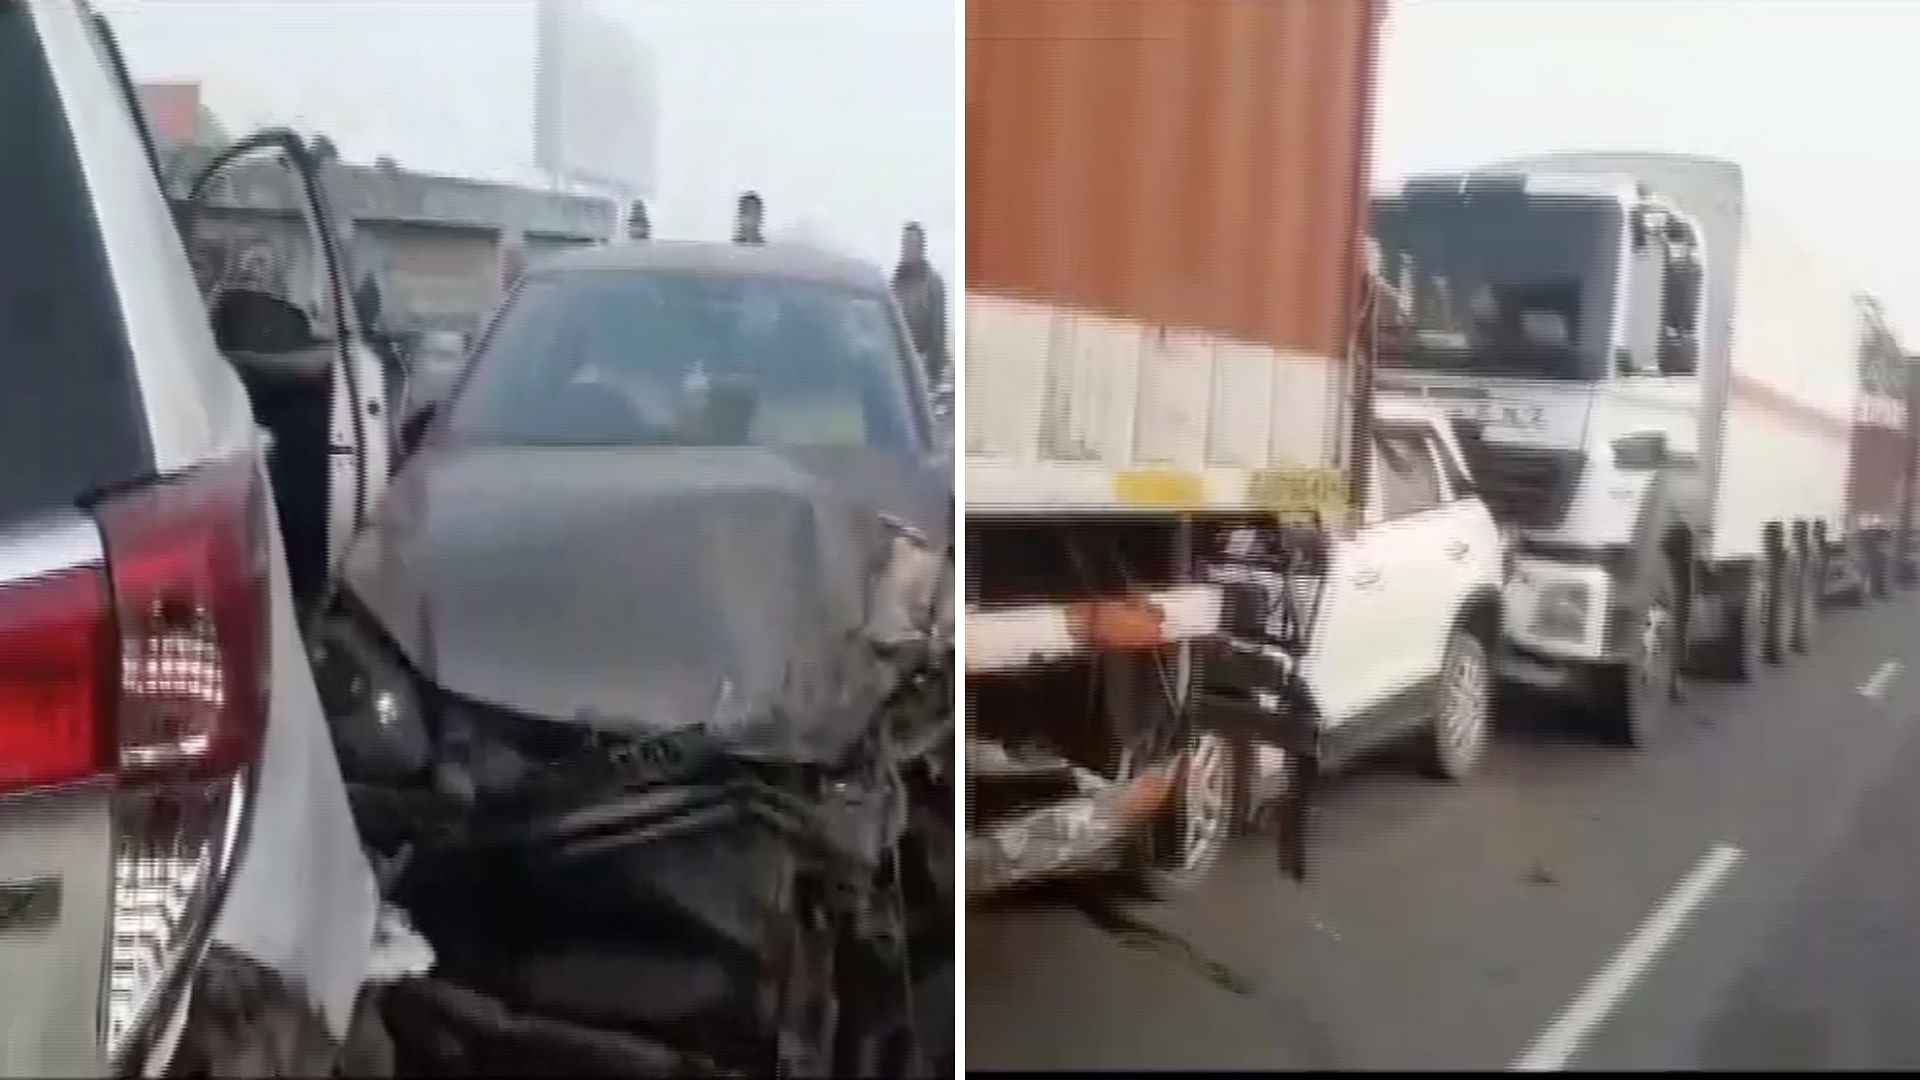  About a dozen people were injured in the pile-up on the Delhi-Jaipur highway